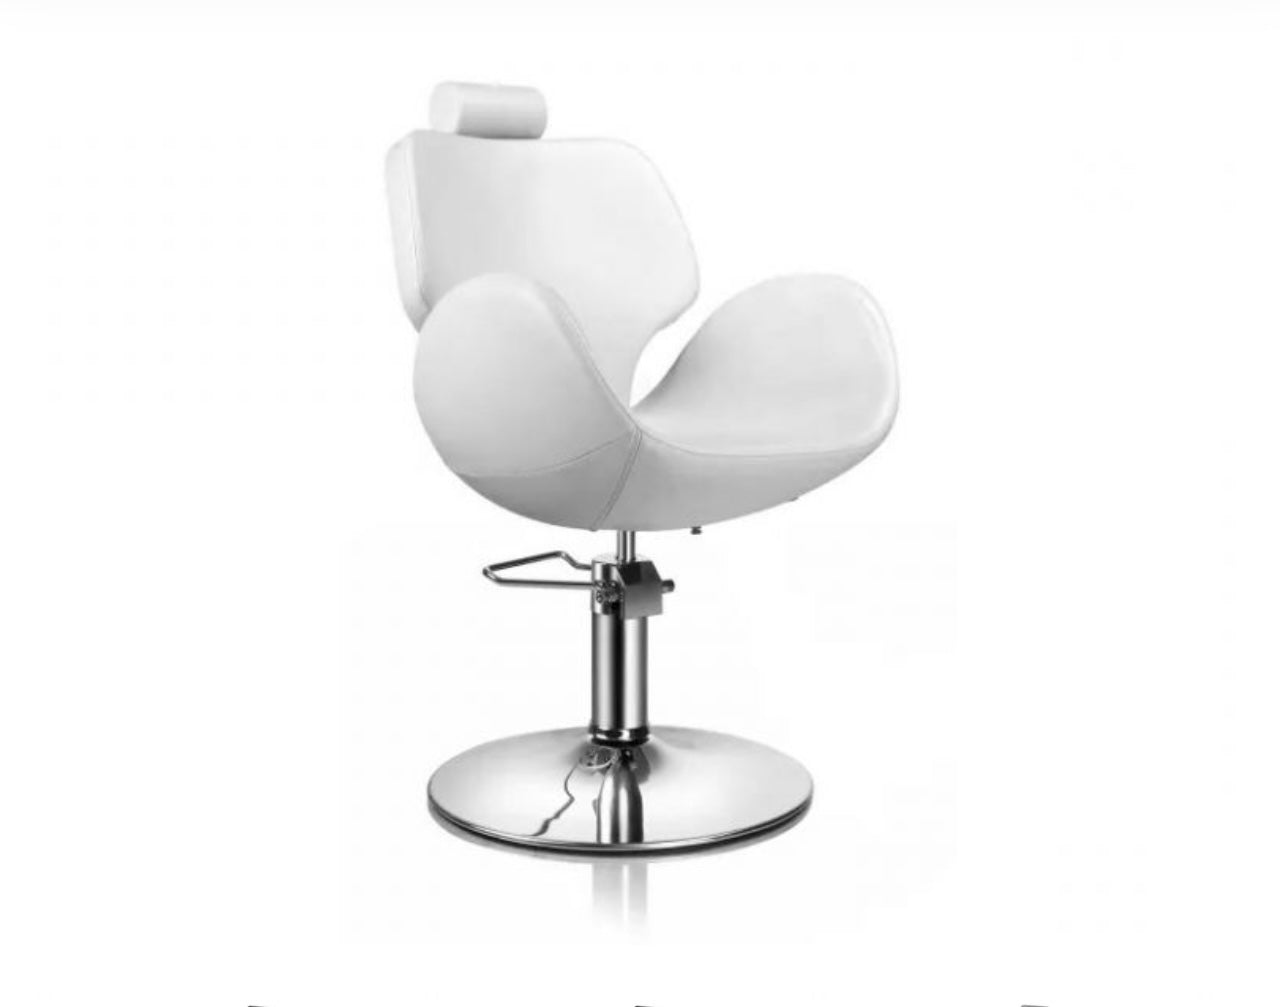 SPACE 1 -STYLING CHAIR (PER WEEK)